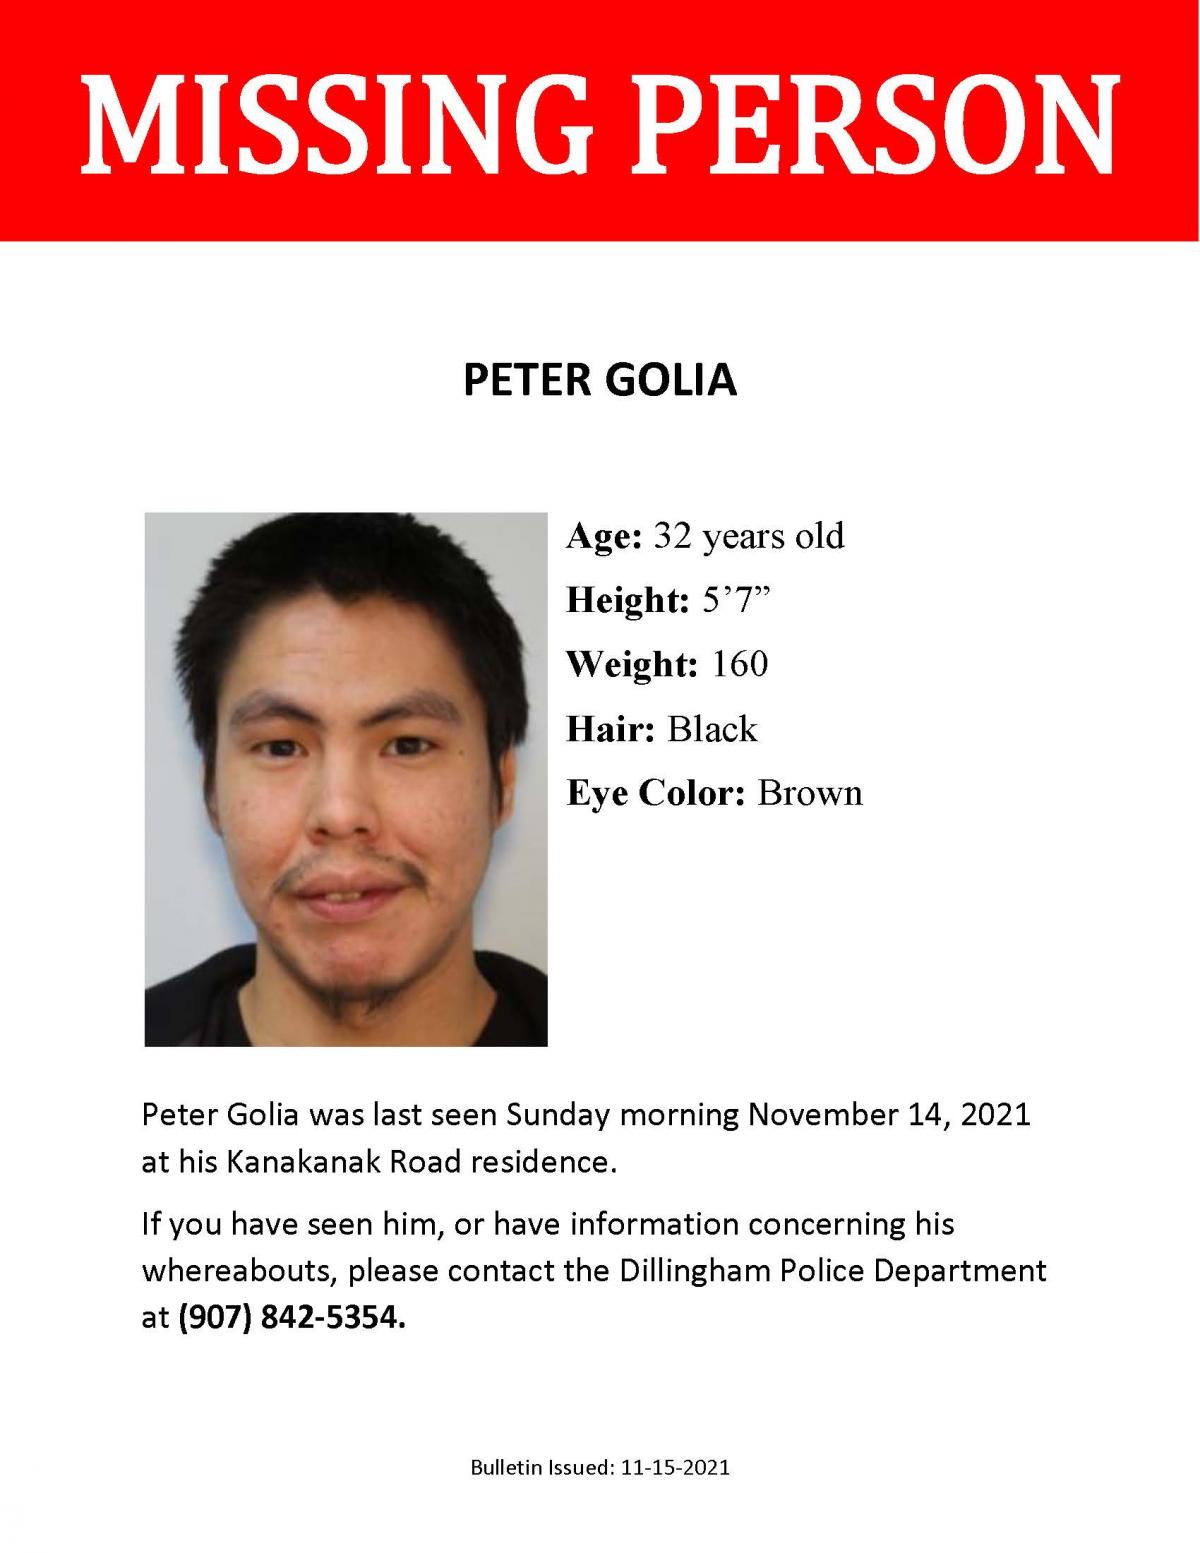 MISSING PERSON - Peter Golia